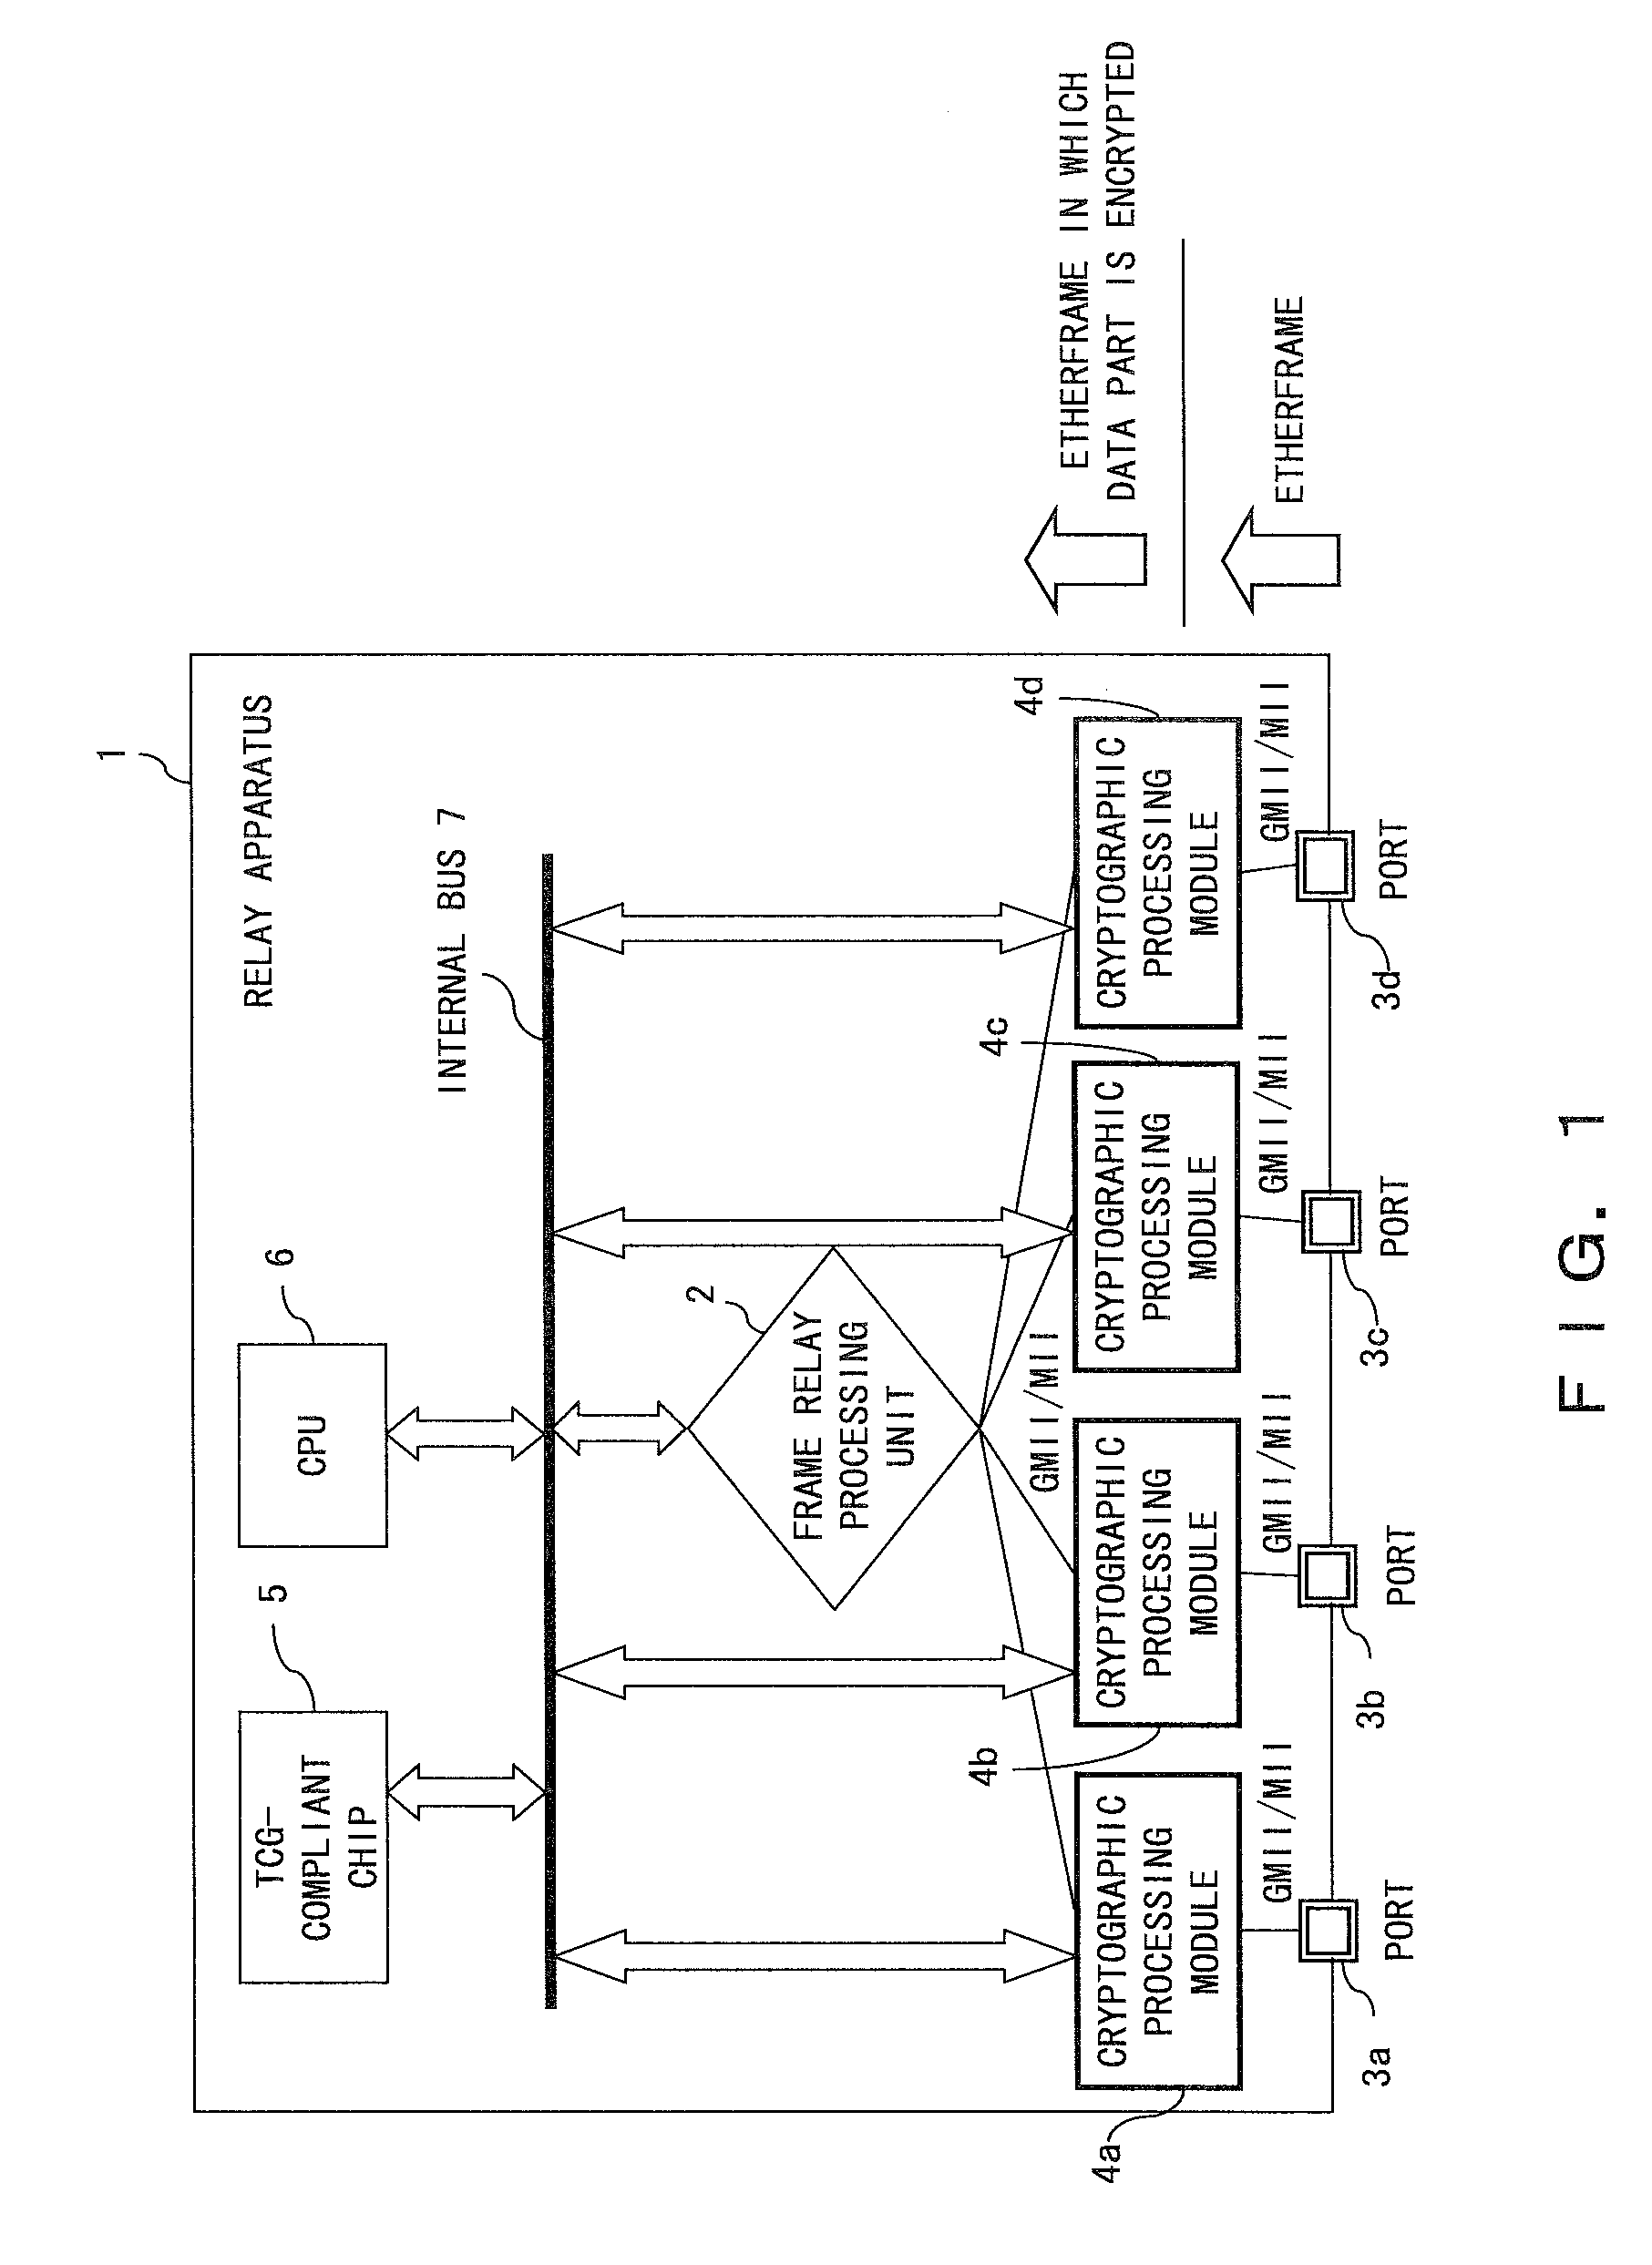 Relay apparatus for encrypting and relaying a frame